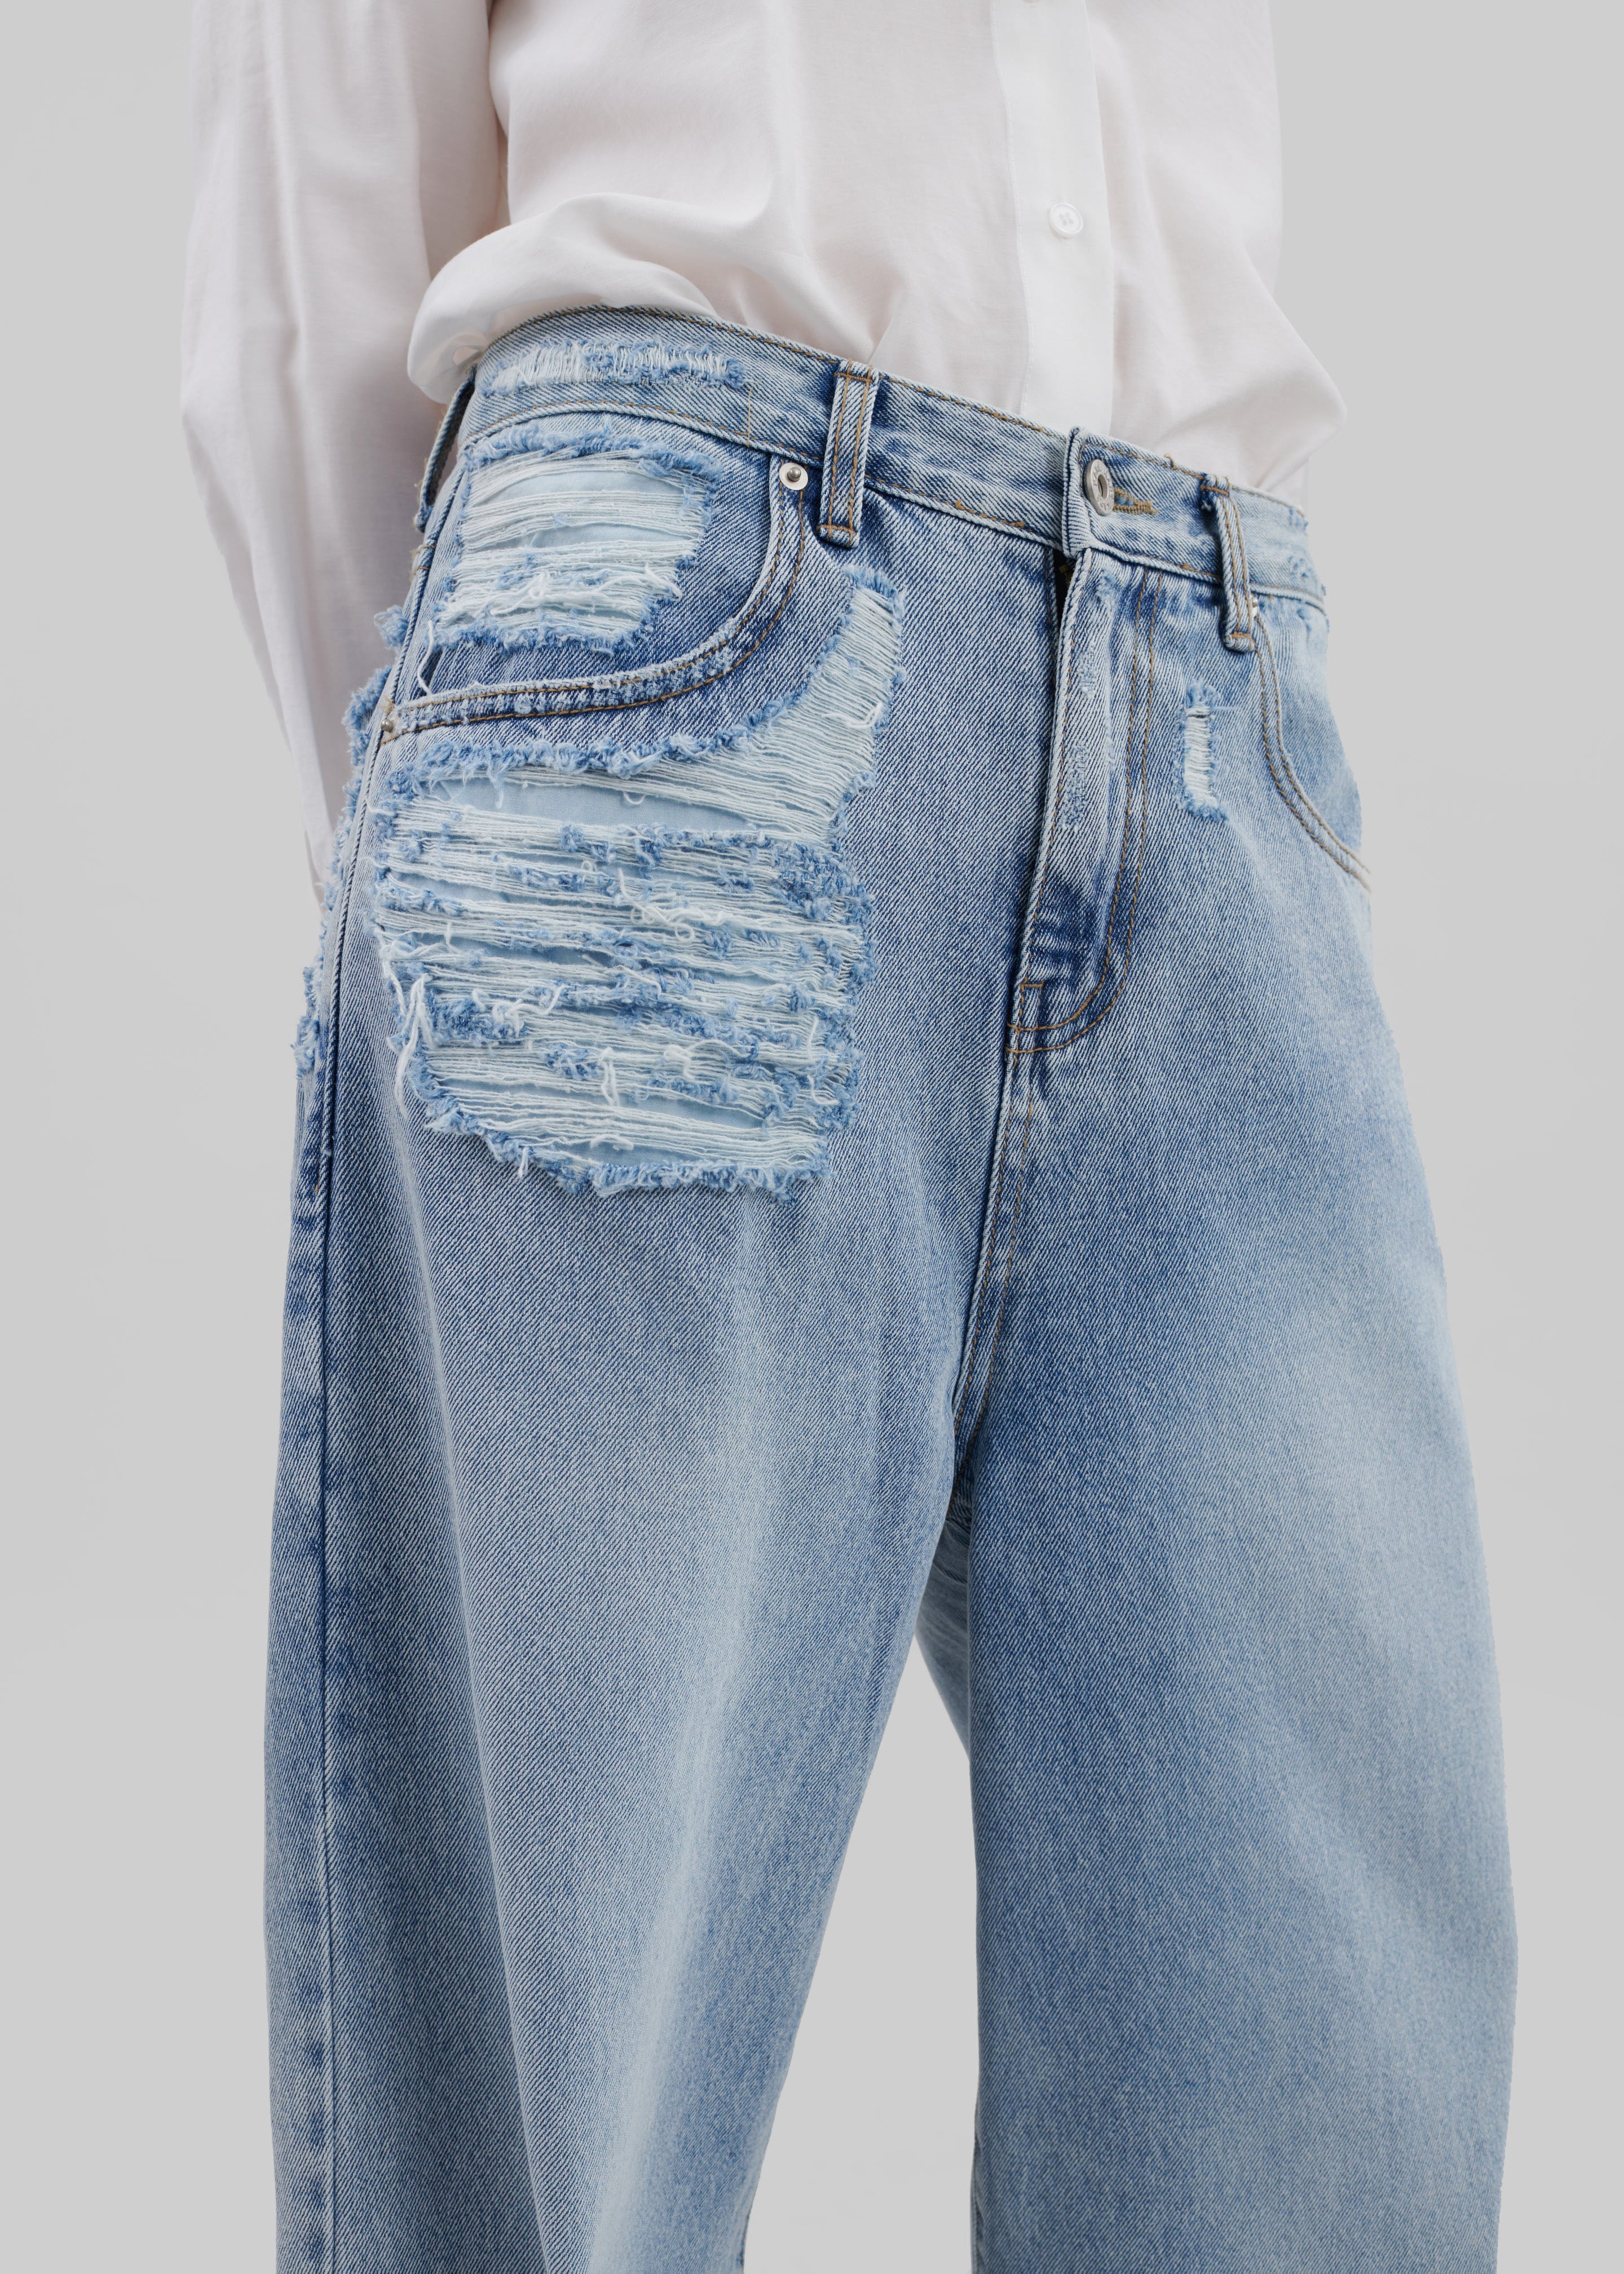 Ceres Ripped Jeans - Worn Wash - 4